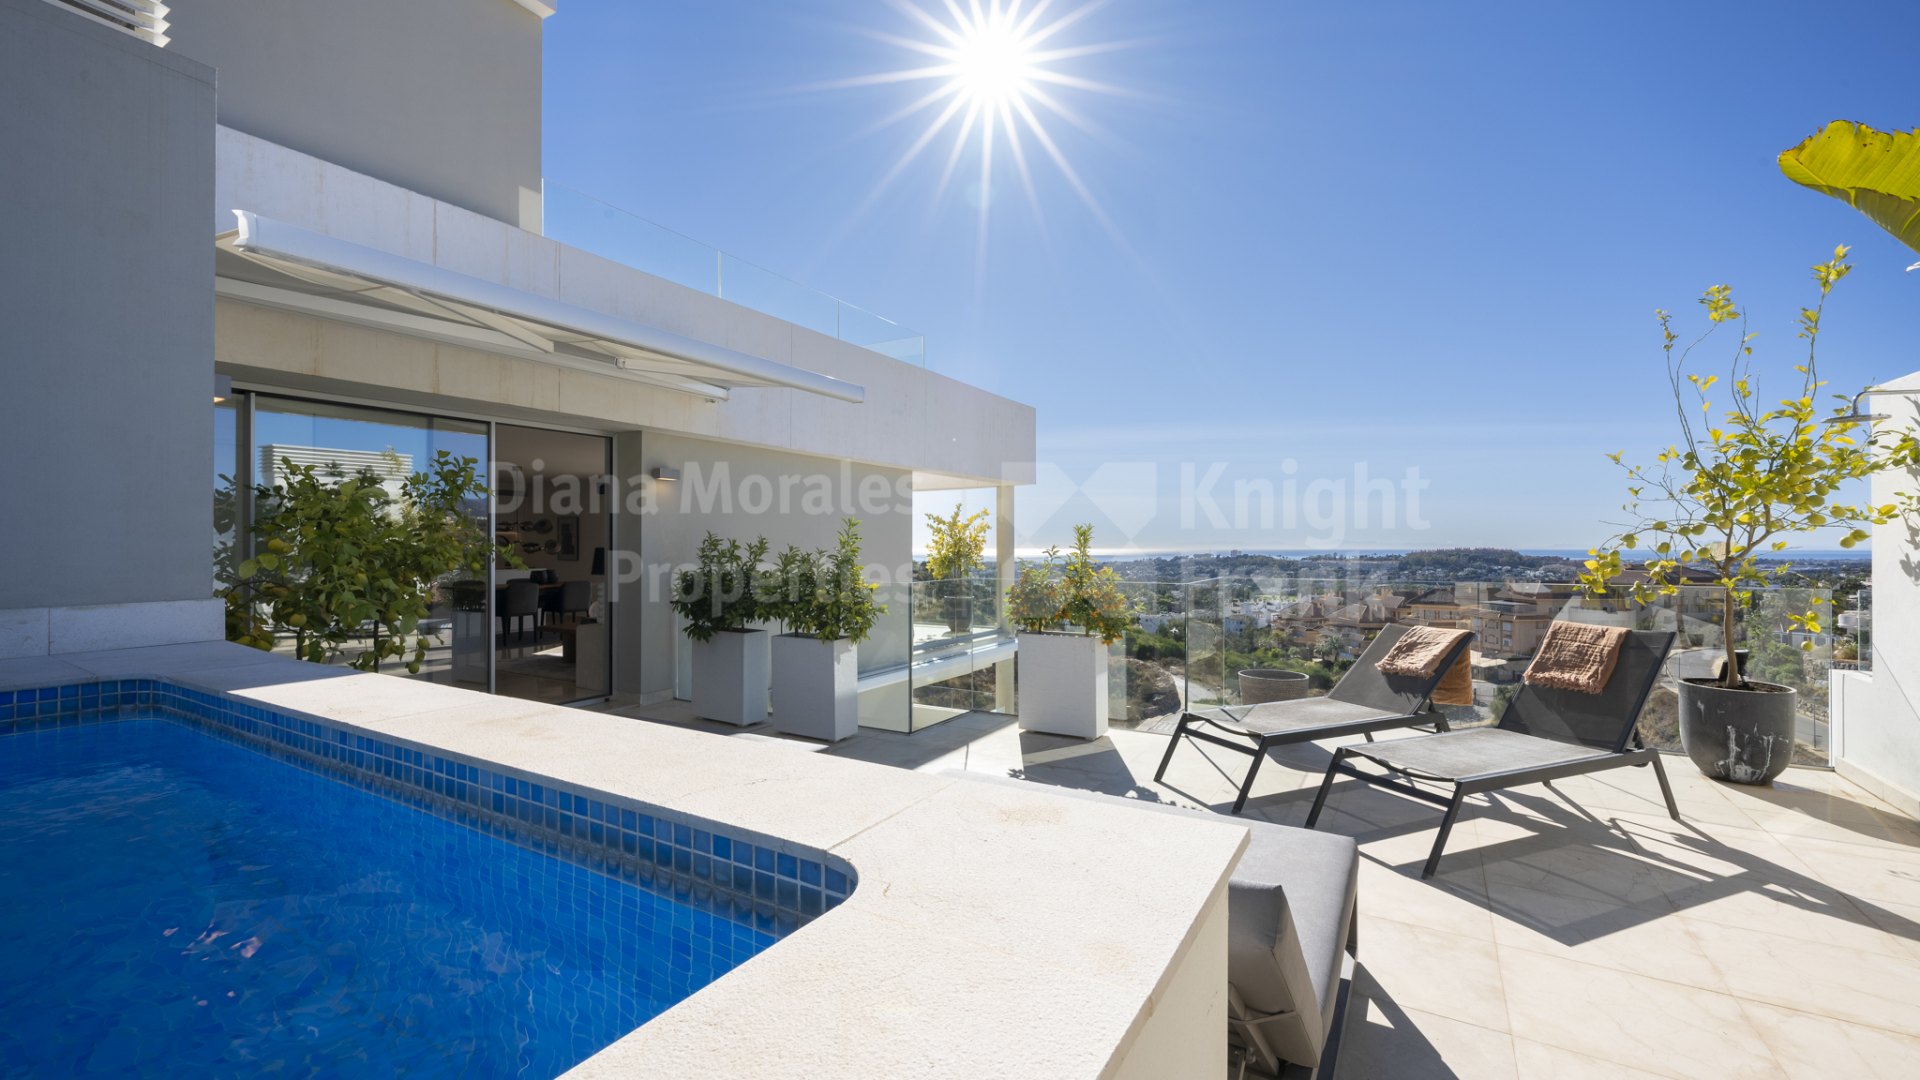 La Morelia de Marbella, Luxurious duplex penthouse with stunning views and private heated pool